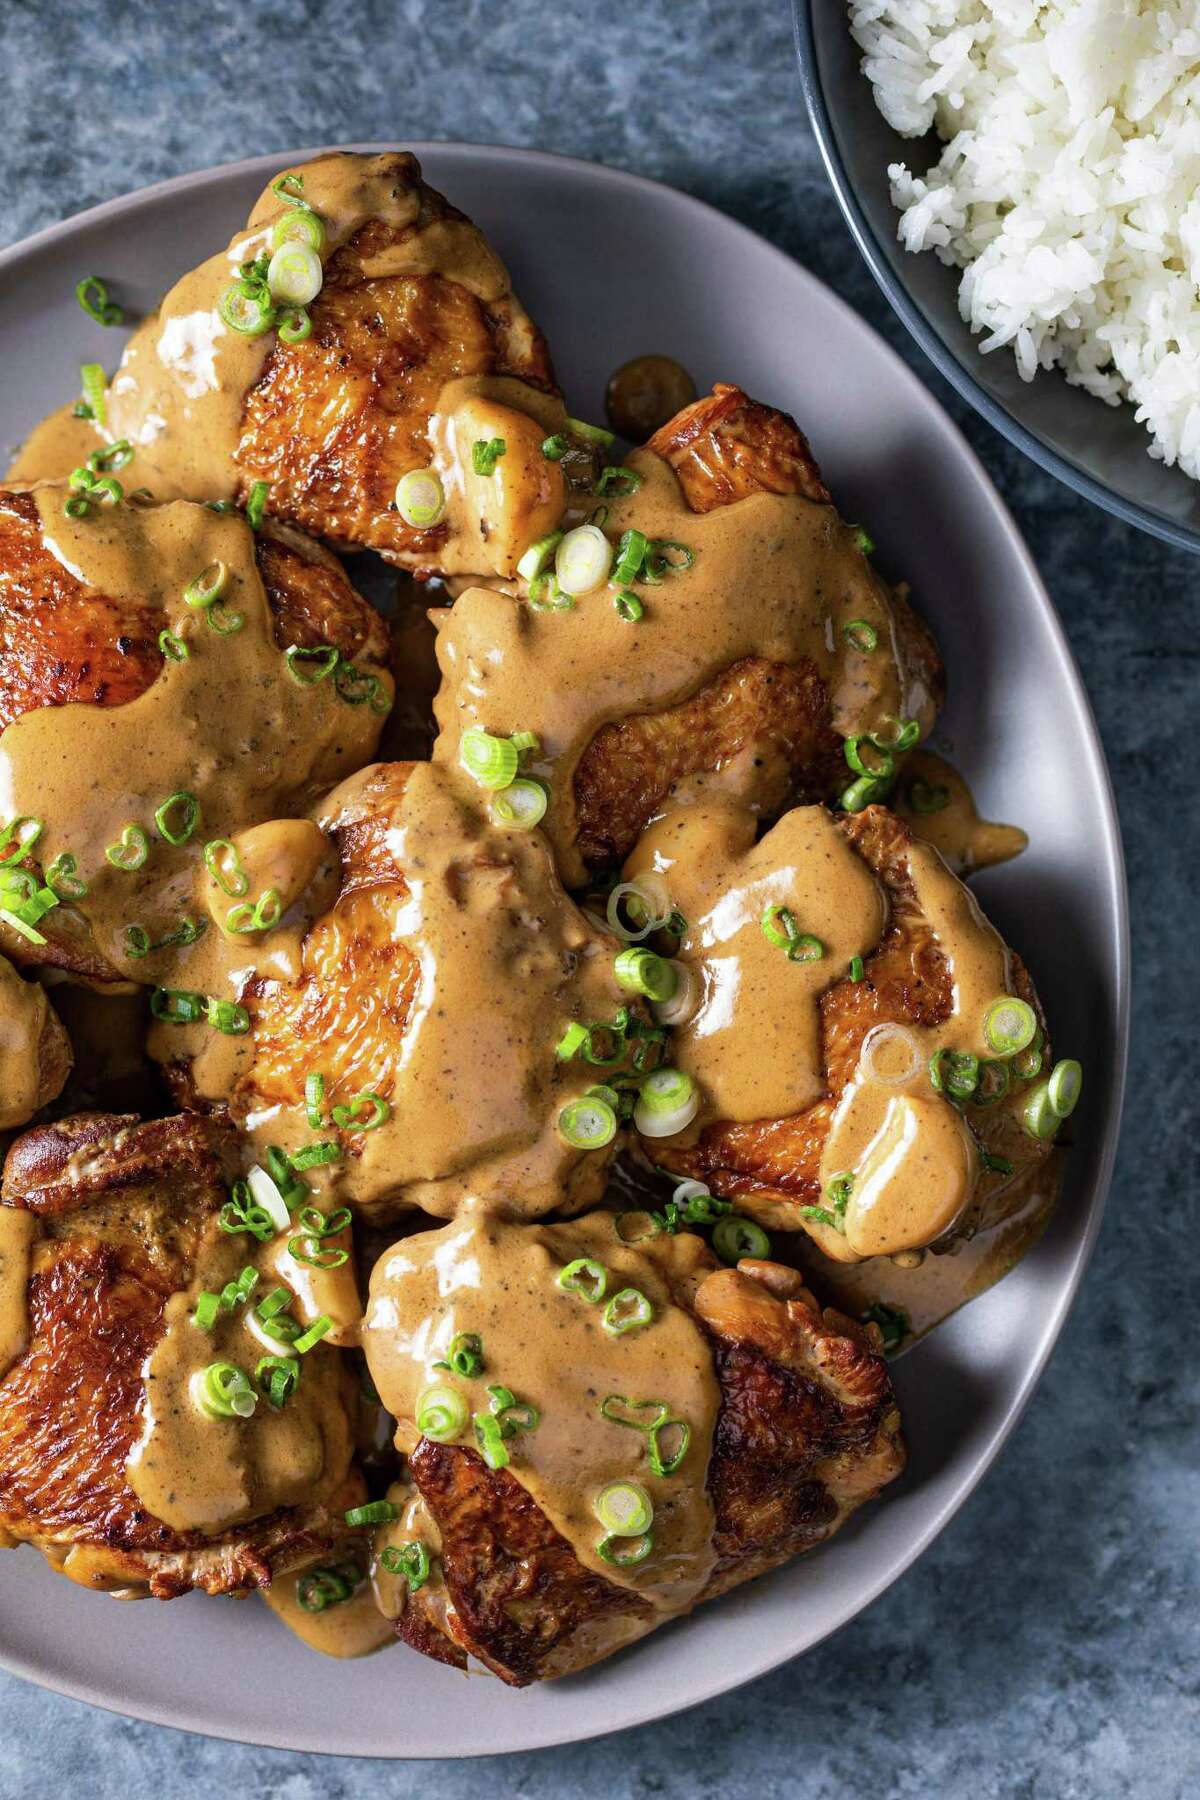 Filipino Chicken Adobo is make with coconut milk, vinegar and chicken thighs from "The Chicken Bible" from America's Test Kitchen.